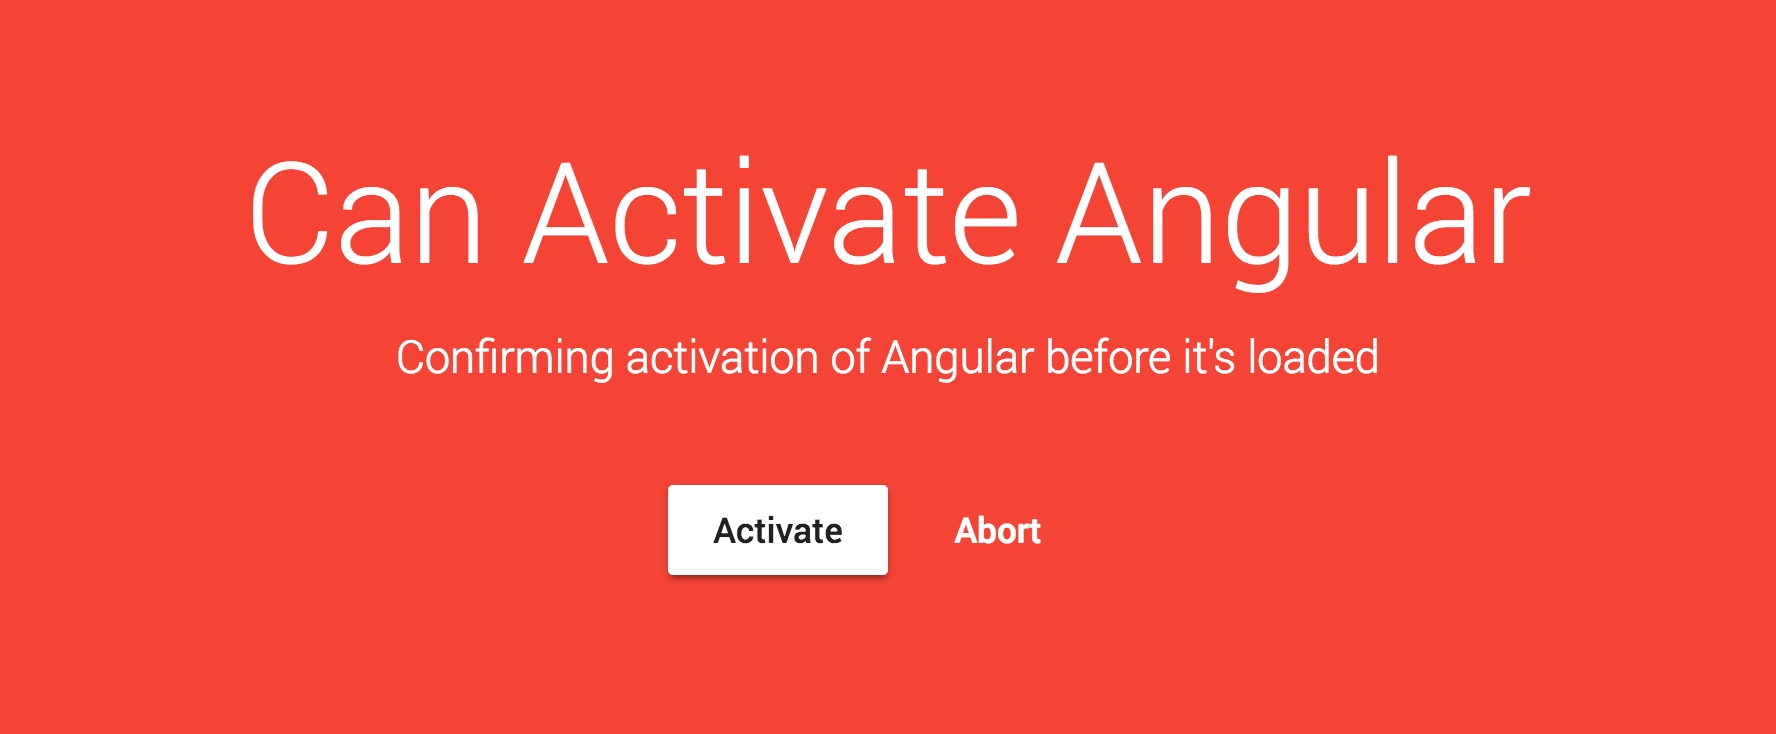 Can Activate Angular